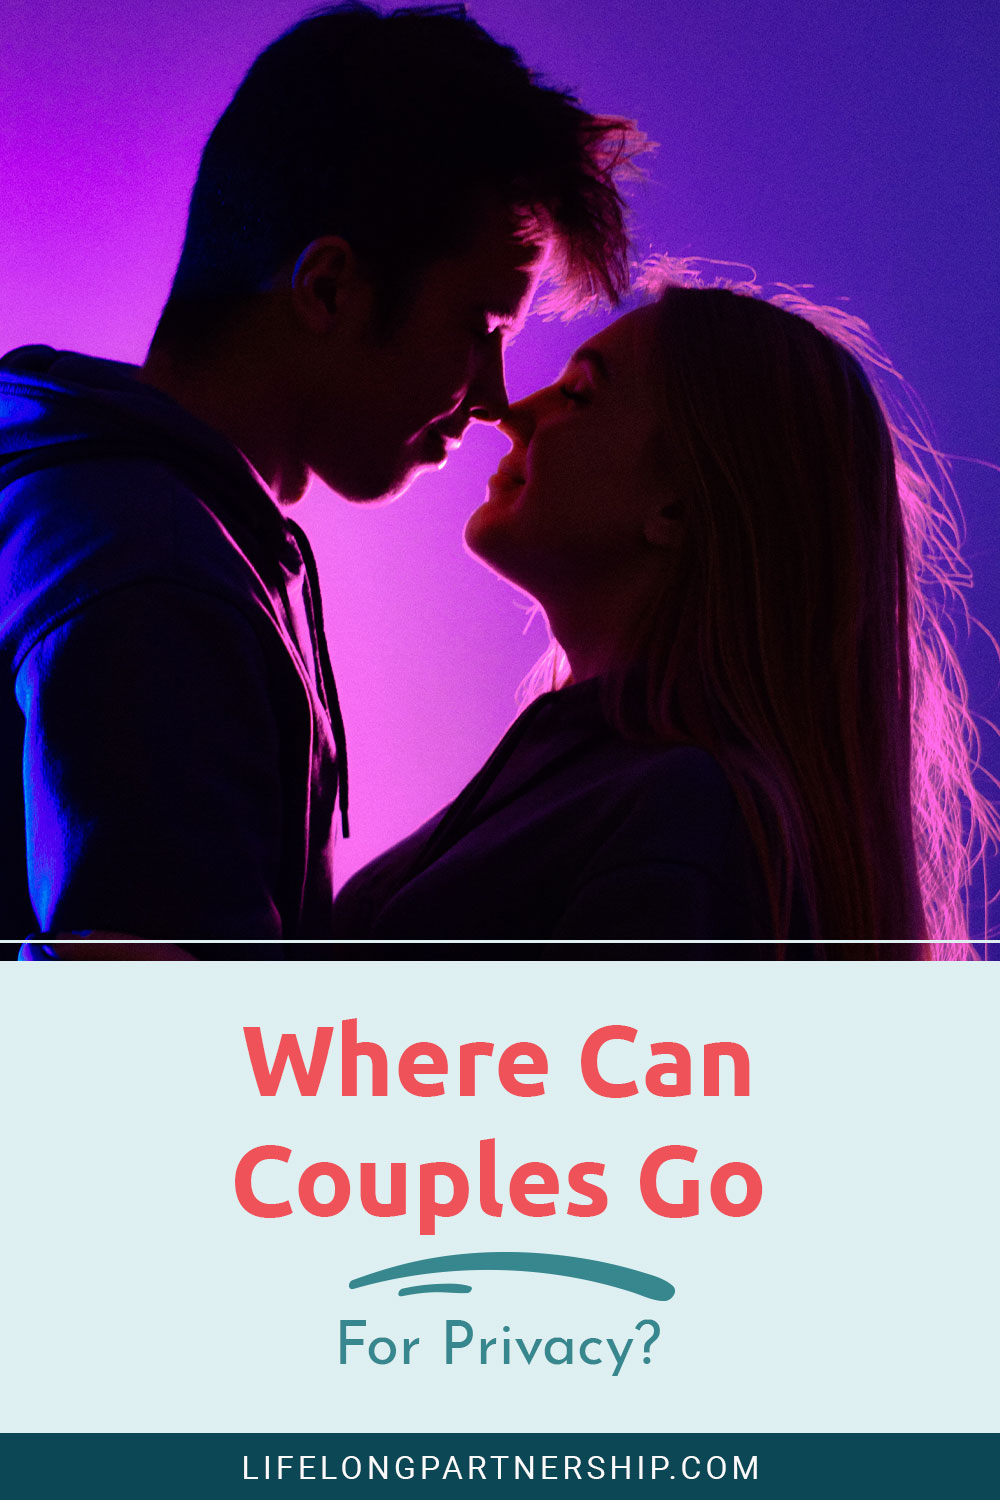 Couples face to face and close to each other - Where Can Couples Go For Privacy?